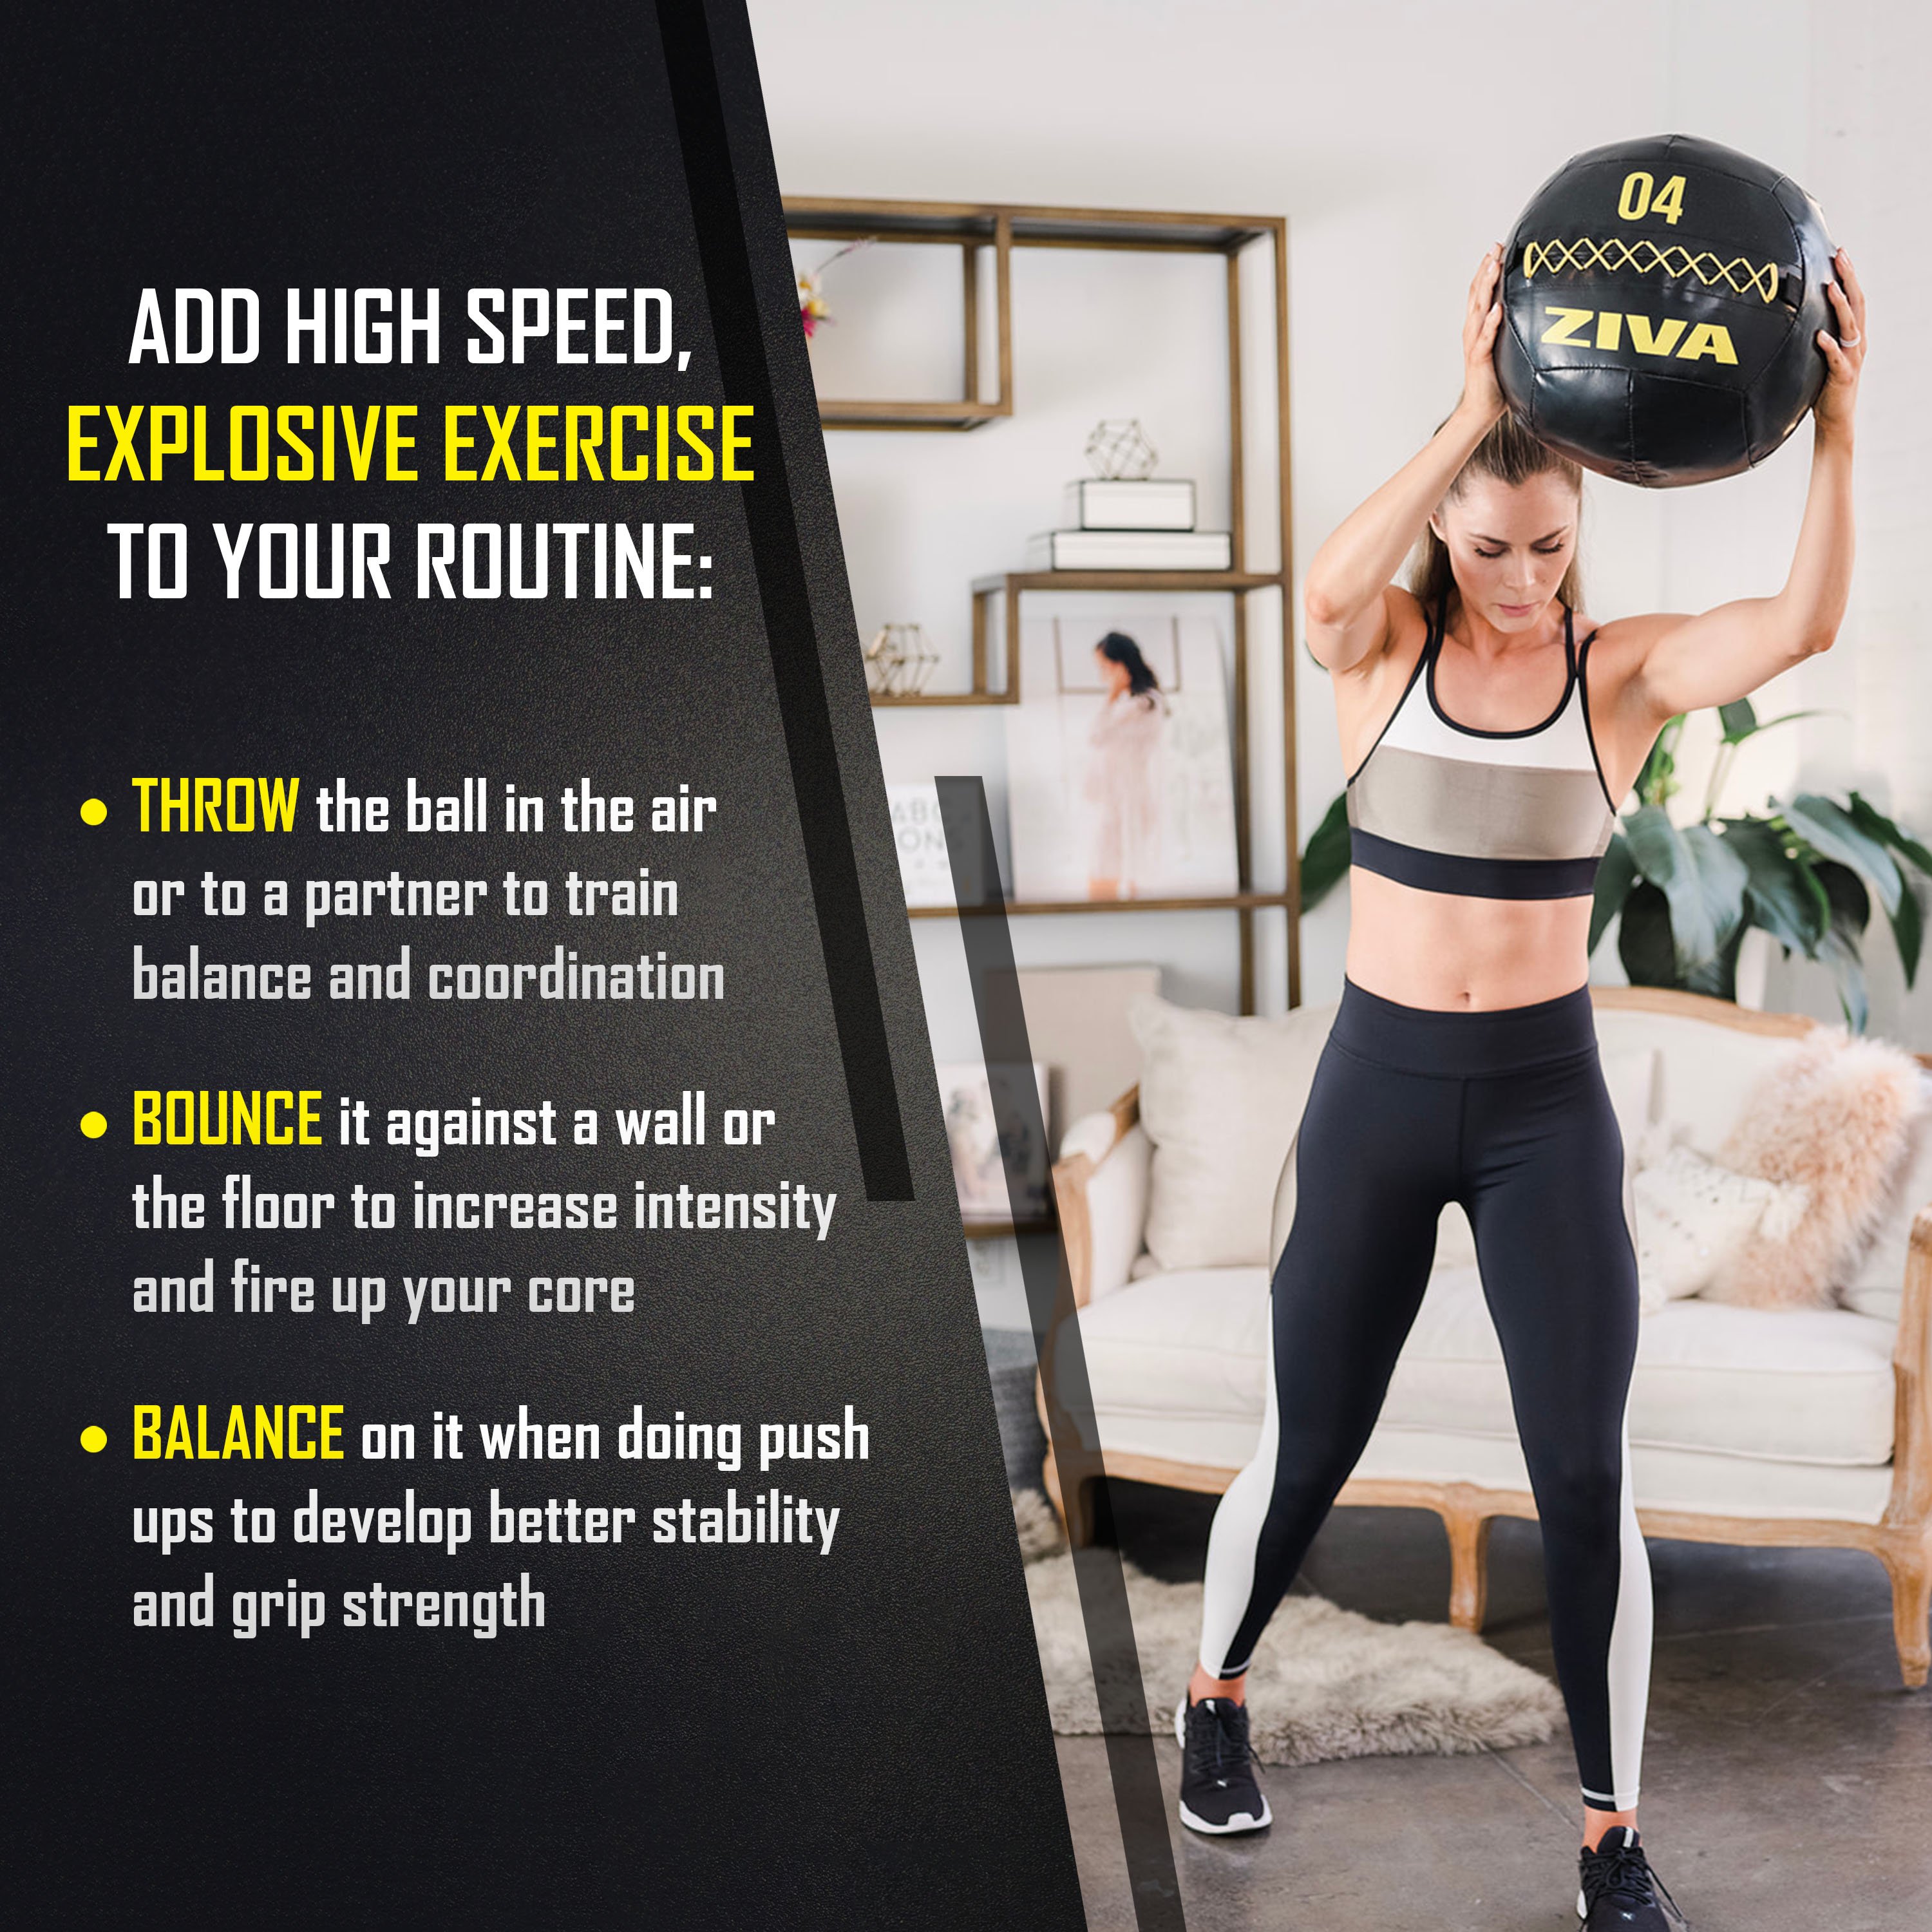 Add high speed, explosive exercise to your routine: throw the ball in the air or to a partner to train balance and coordination. Bounce it against a wall or the floor to increase intensity and fire up your core. Balance on it when doing push ups to develop better stability and grip strength.